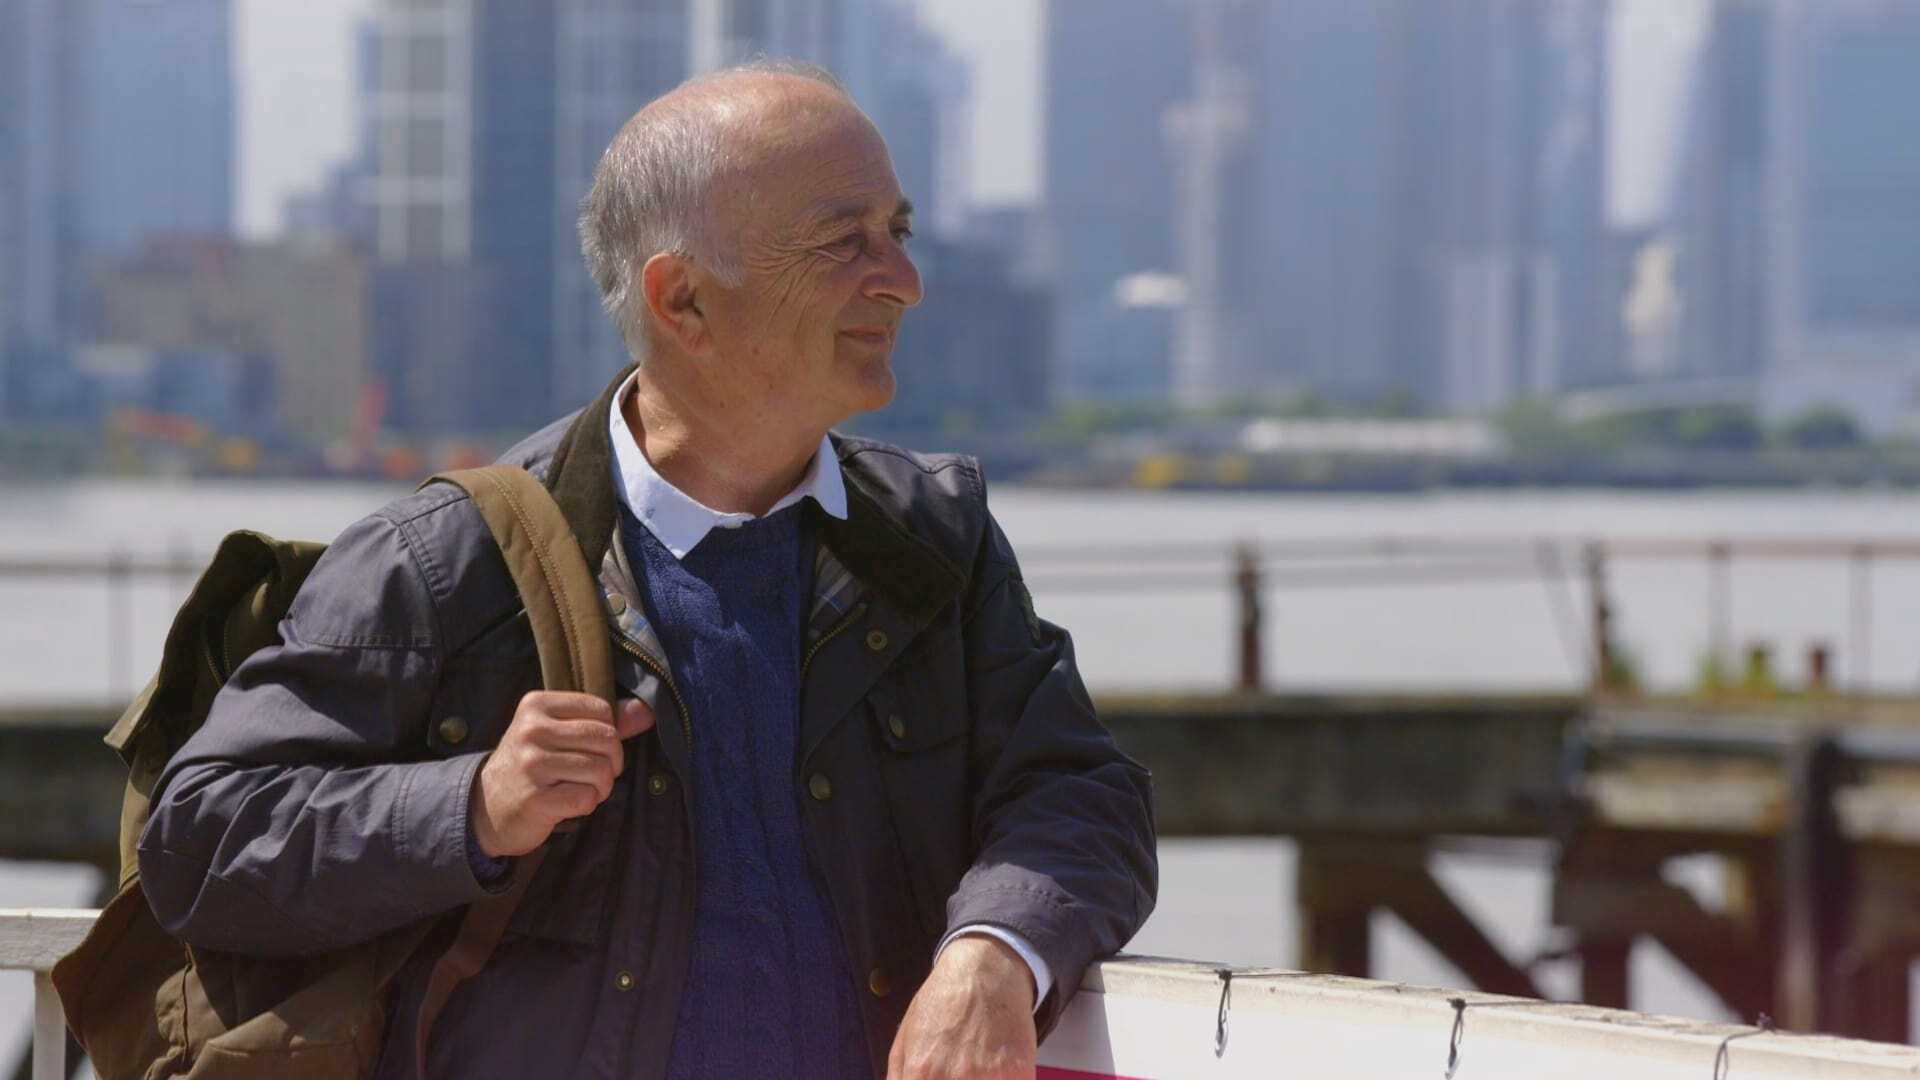 The Thames: Britain's Great River with Tony Robinson